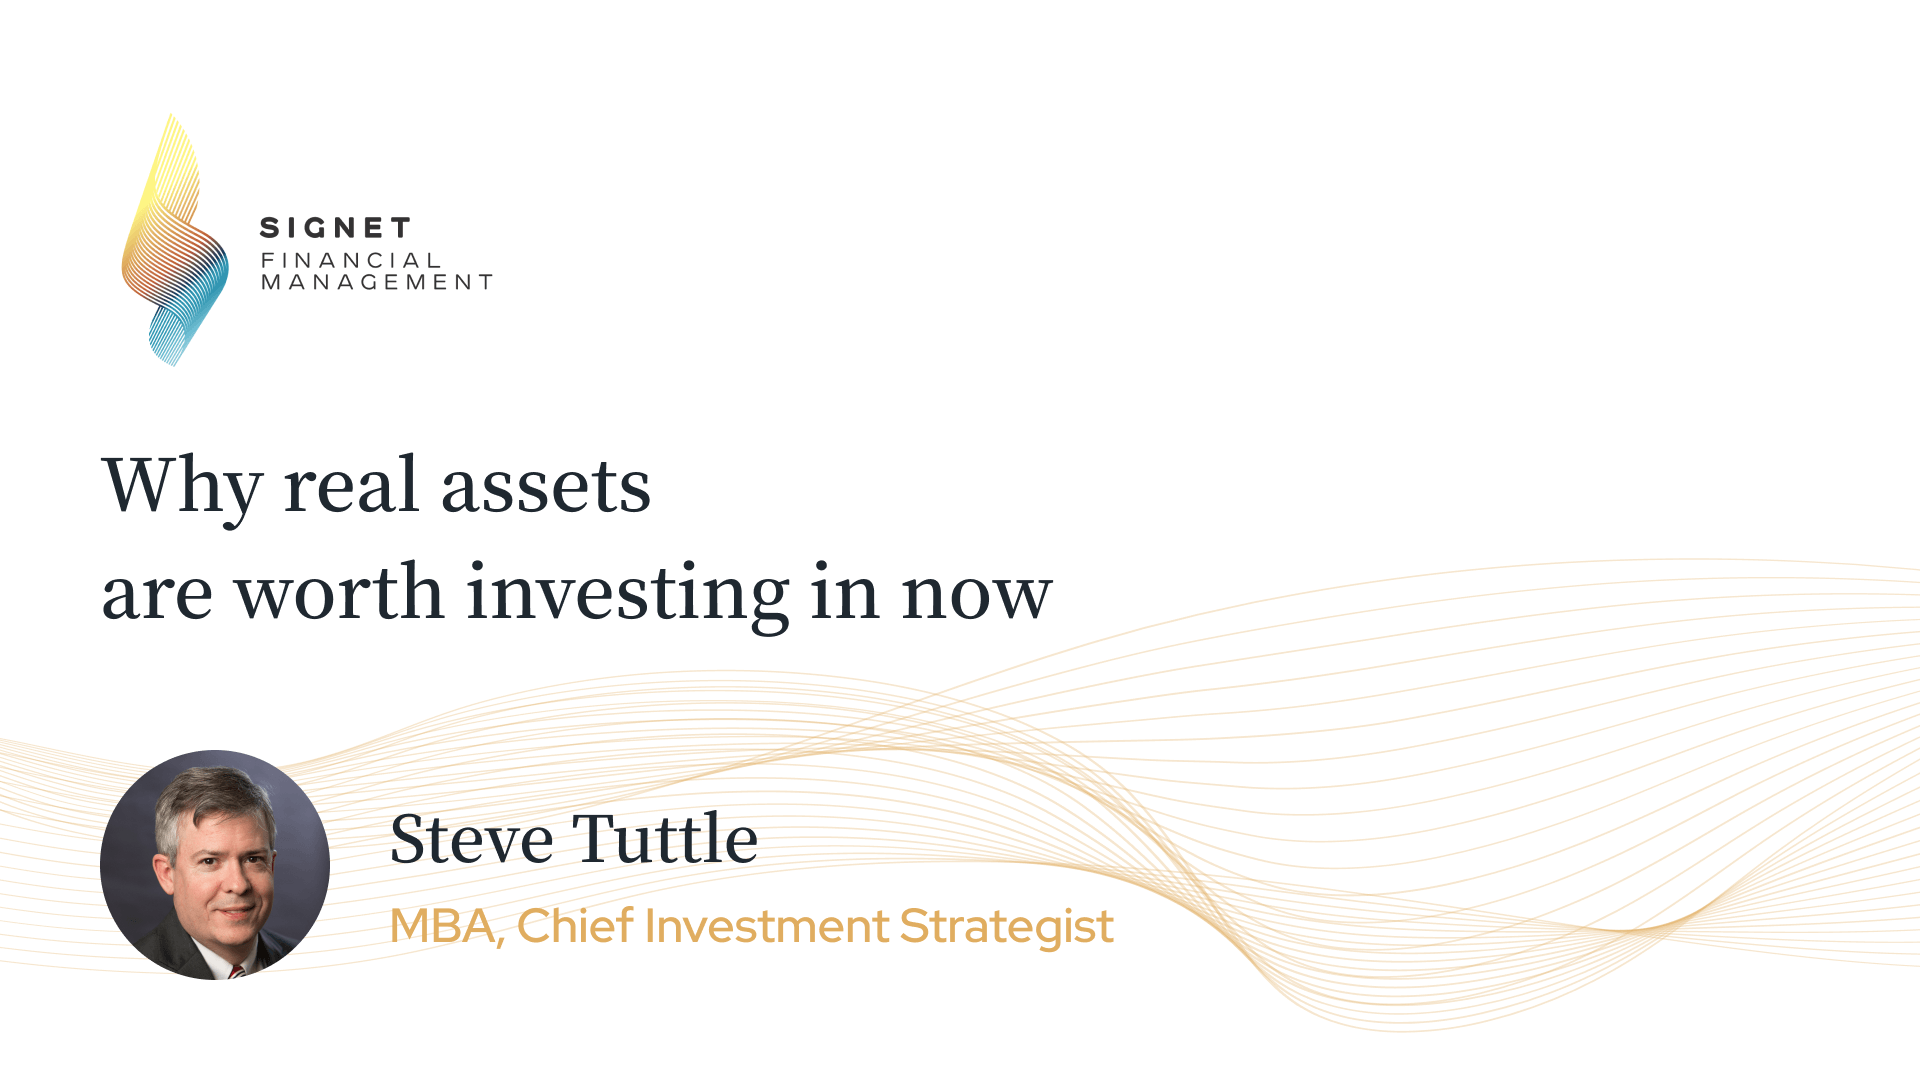 Real asset investing